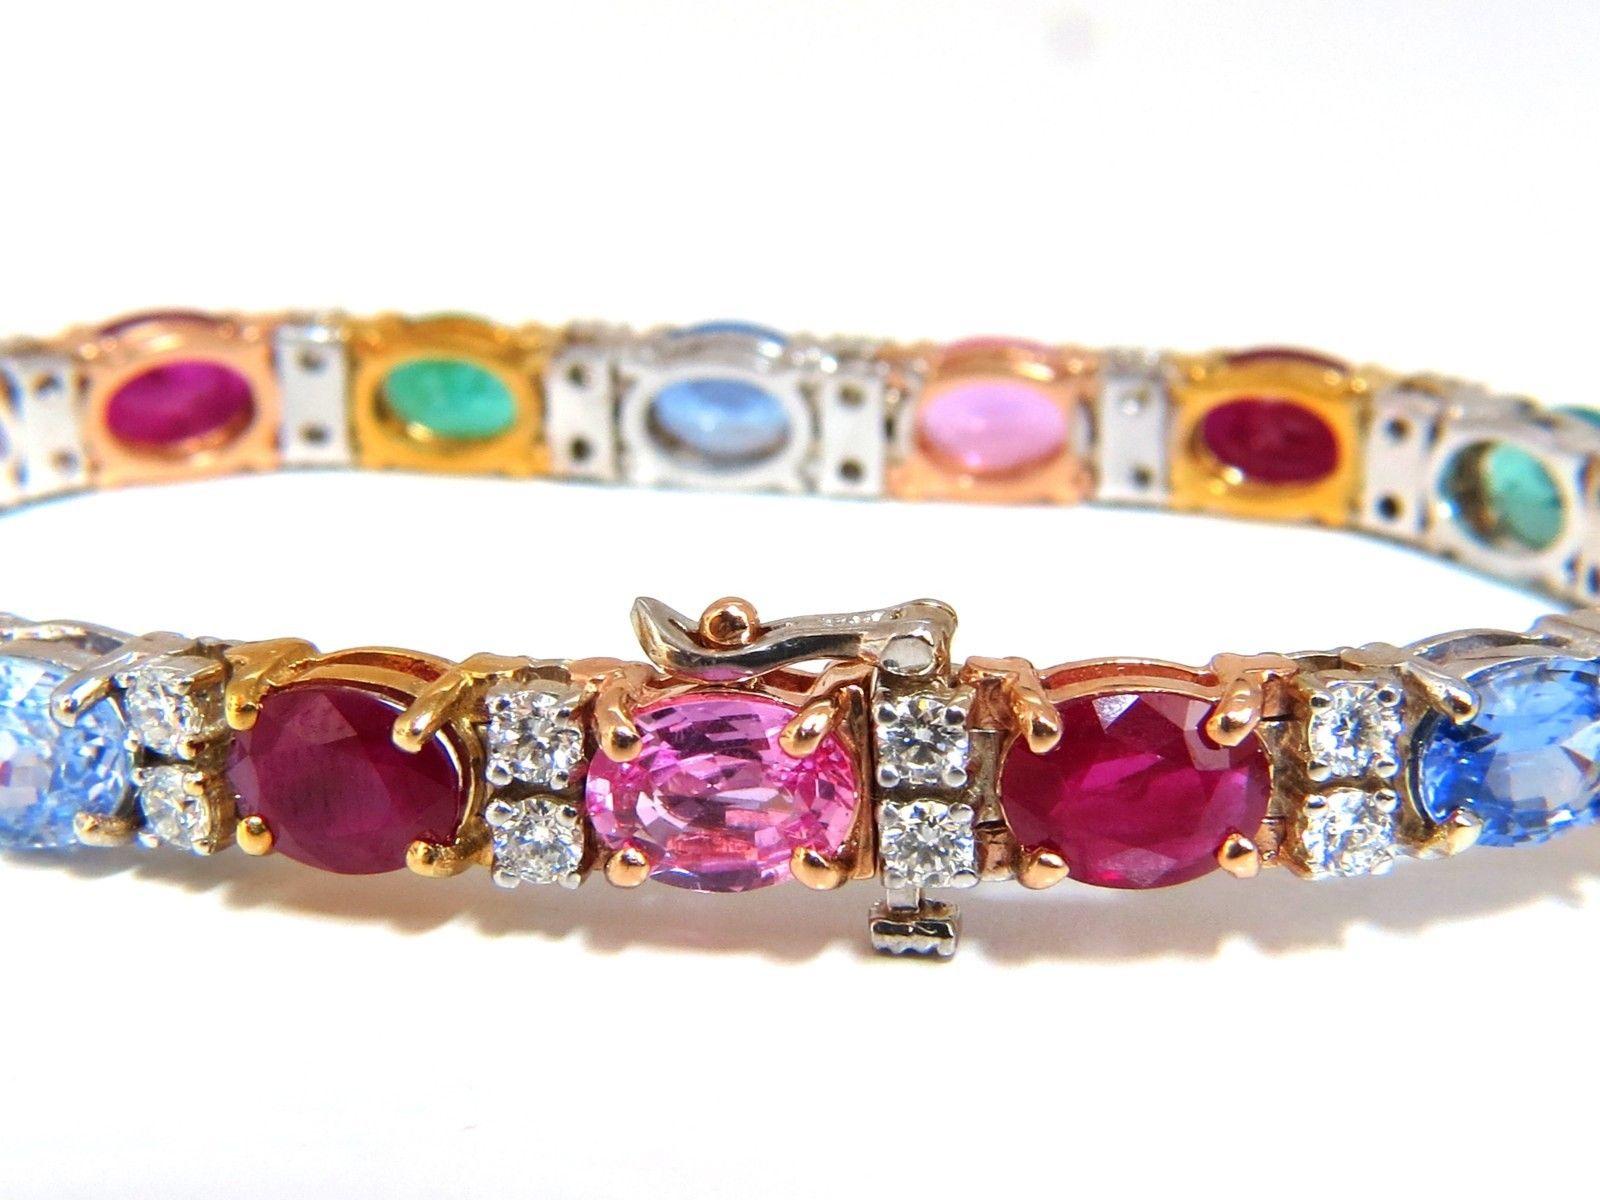 Ladies Assorted Gem Line Bracelet.

20.52ct. Natural Ruby, Multicolor Sapphires & Emeralds.

Average: 7 x 5mm

2.40ct natural Round Diamonds

G-color Vs-2 clarity.

Secure pressure clasp and safety catch.

24.2 grams.

14kt. white & yellow gold.